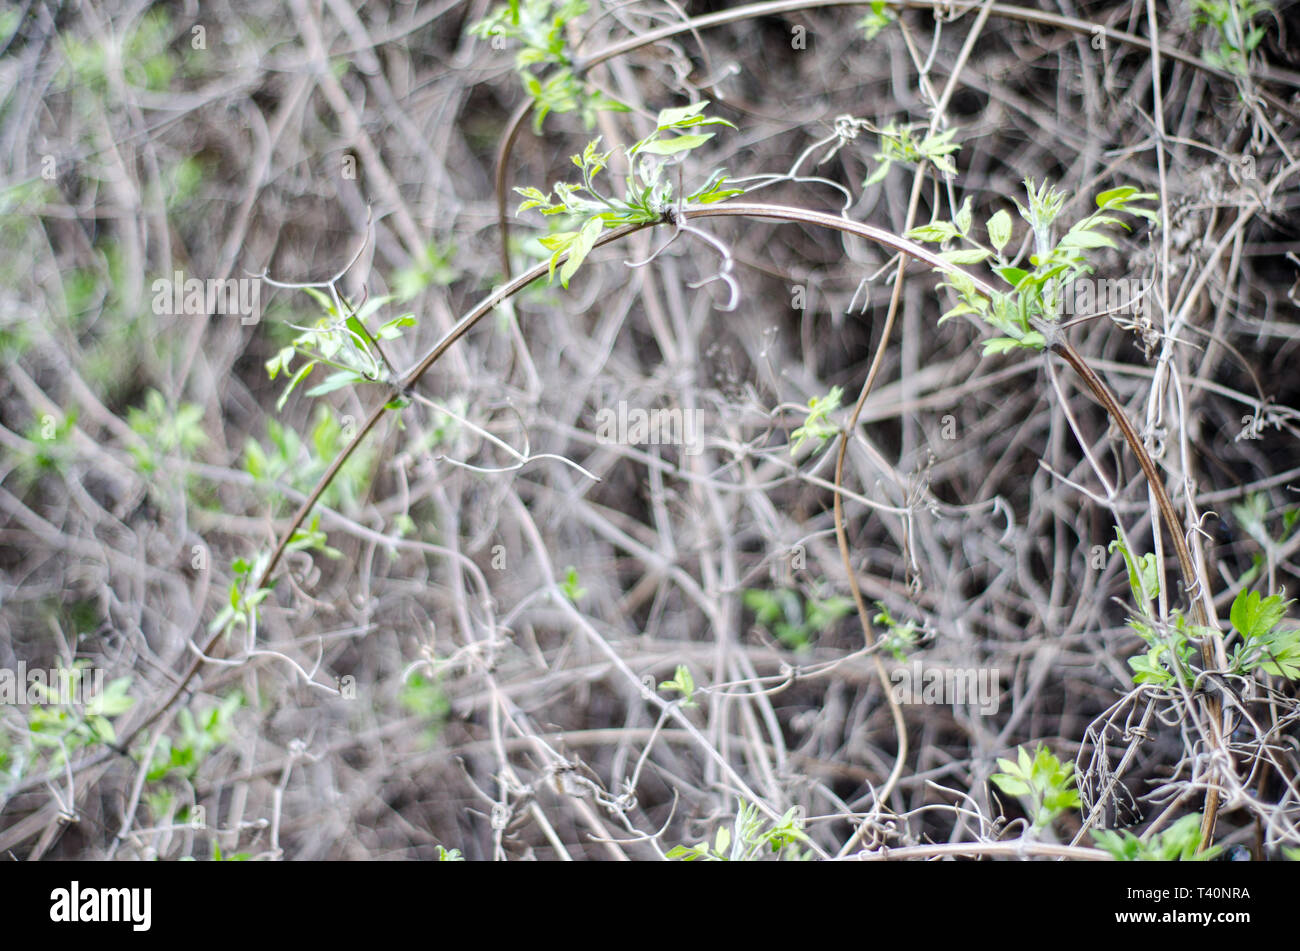 Fresh young leaves in macro. Thin branches of vines in a continuous layer. Stock Photo